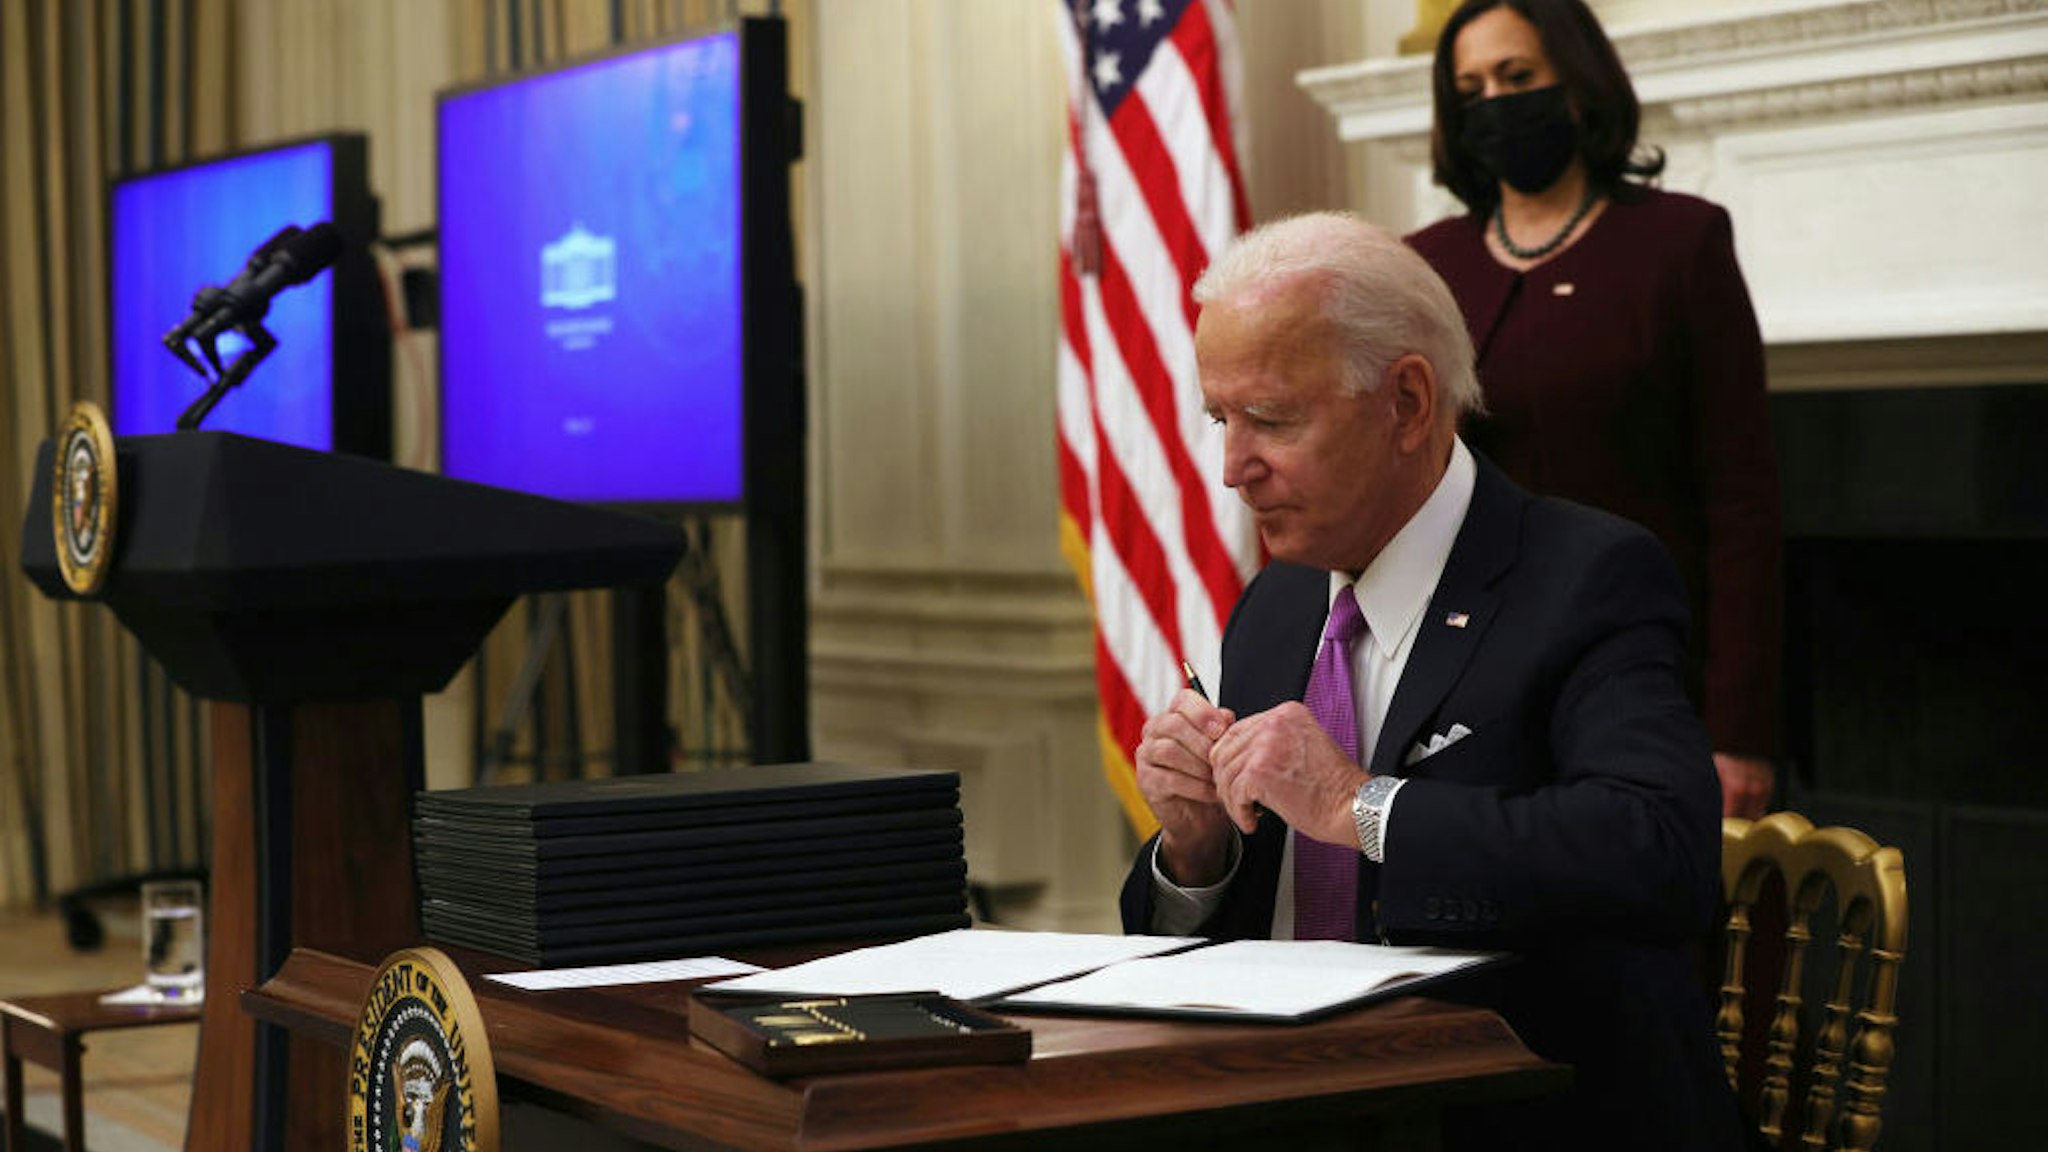 WASHINGTON, DC - JANUARY 21: U.S. President Joe Biden signs executive orders as Vice President Kamala Harris looks on during an event at the State Dining Room of the White House January 21, 2021 in Washington, DC. President Biden delivered remarks on his administration’s COVID-19 response, and signed executive orders and other presidential actions.